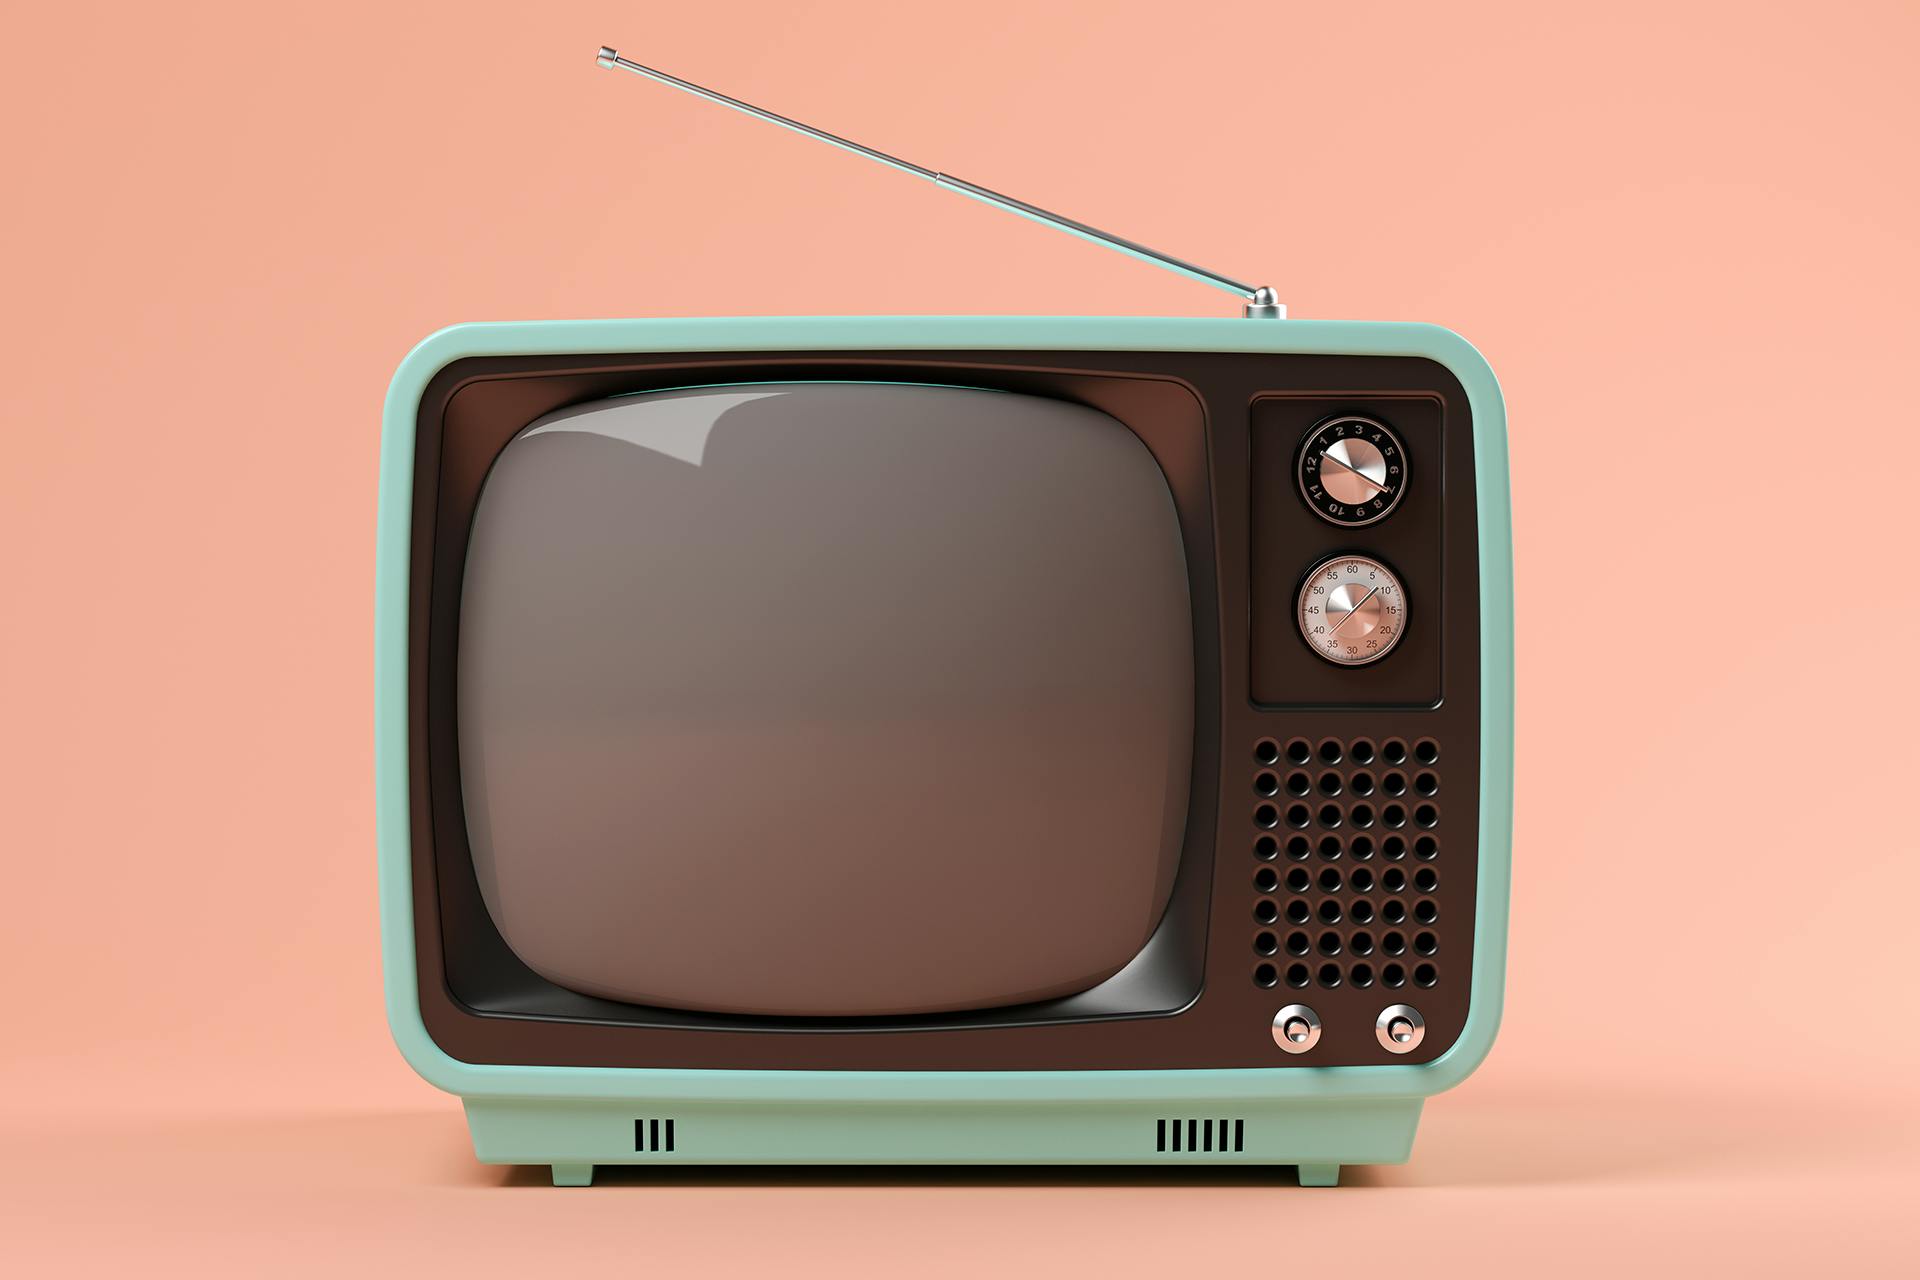 A blue and black retro television with a leaning antenna set against a coral pink background